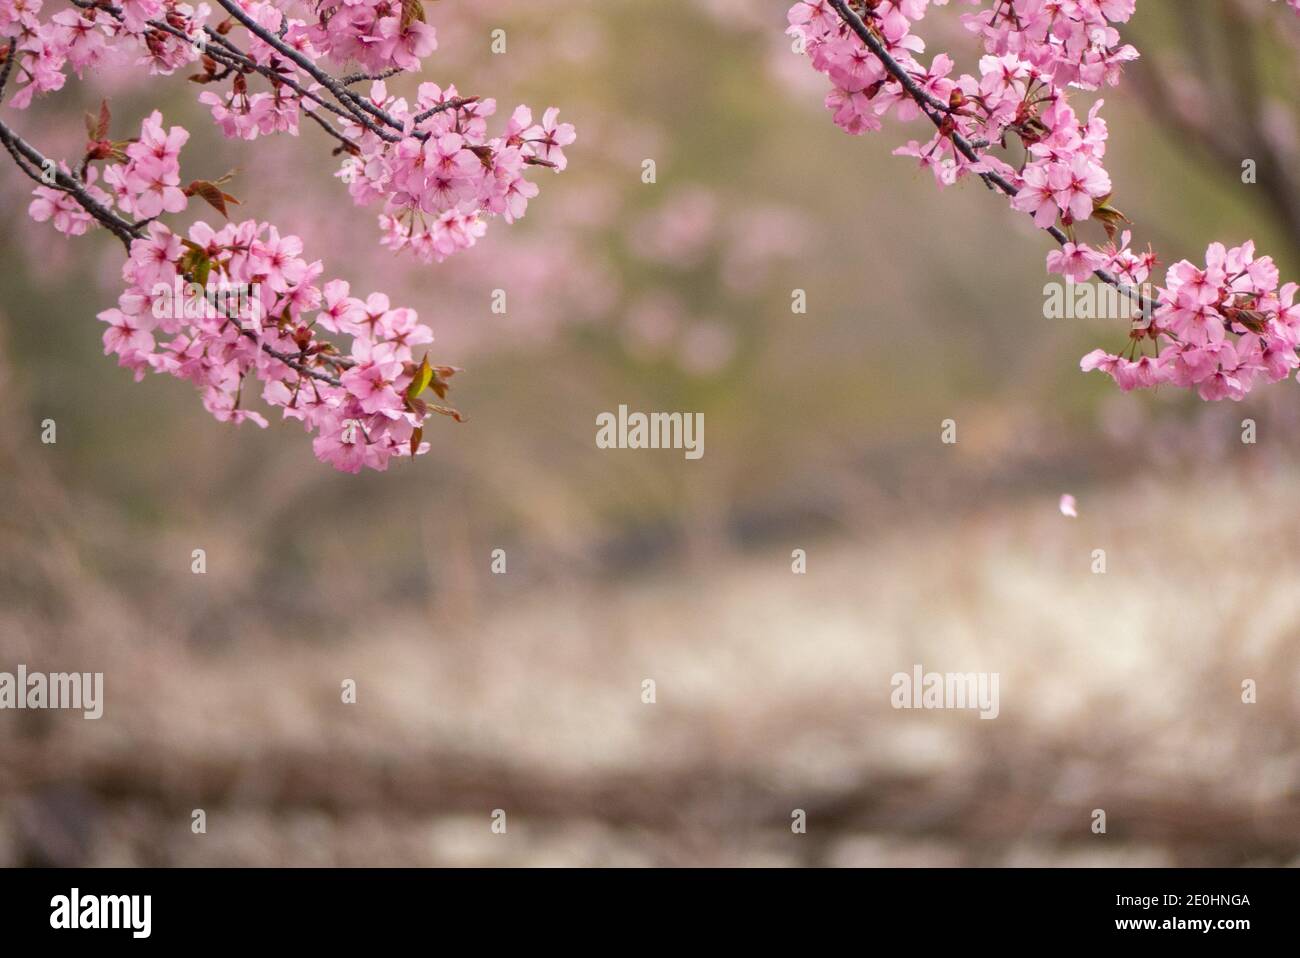 Cherry Blossom with a bird eating insects inside the bloomed pink flowers Stock Photo